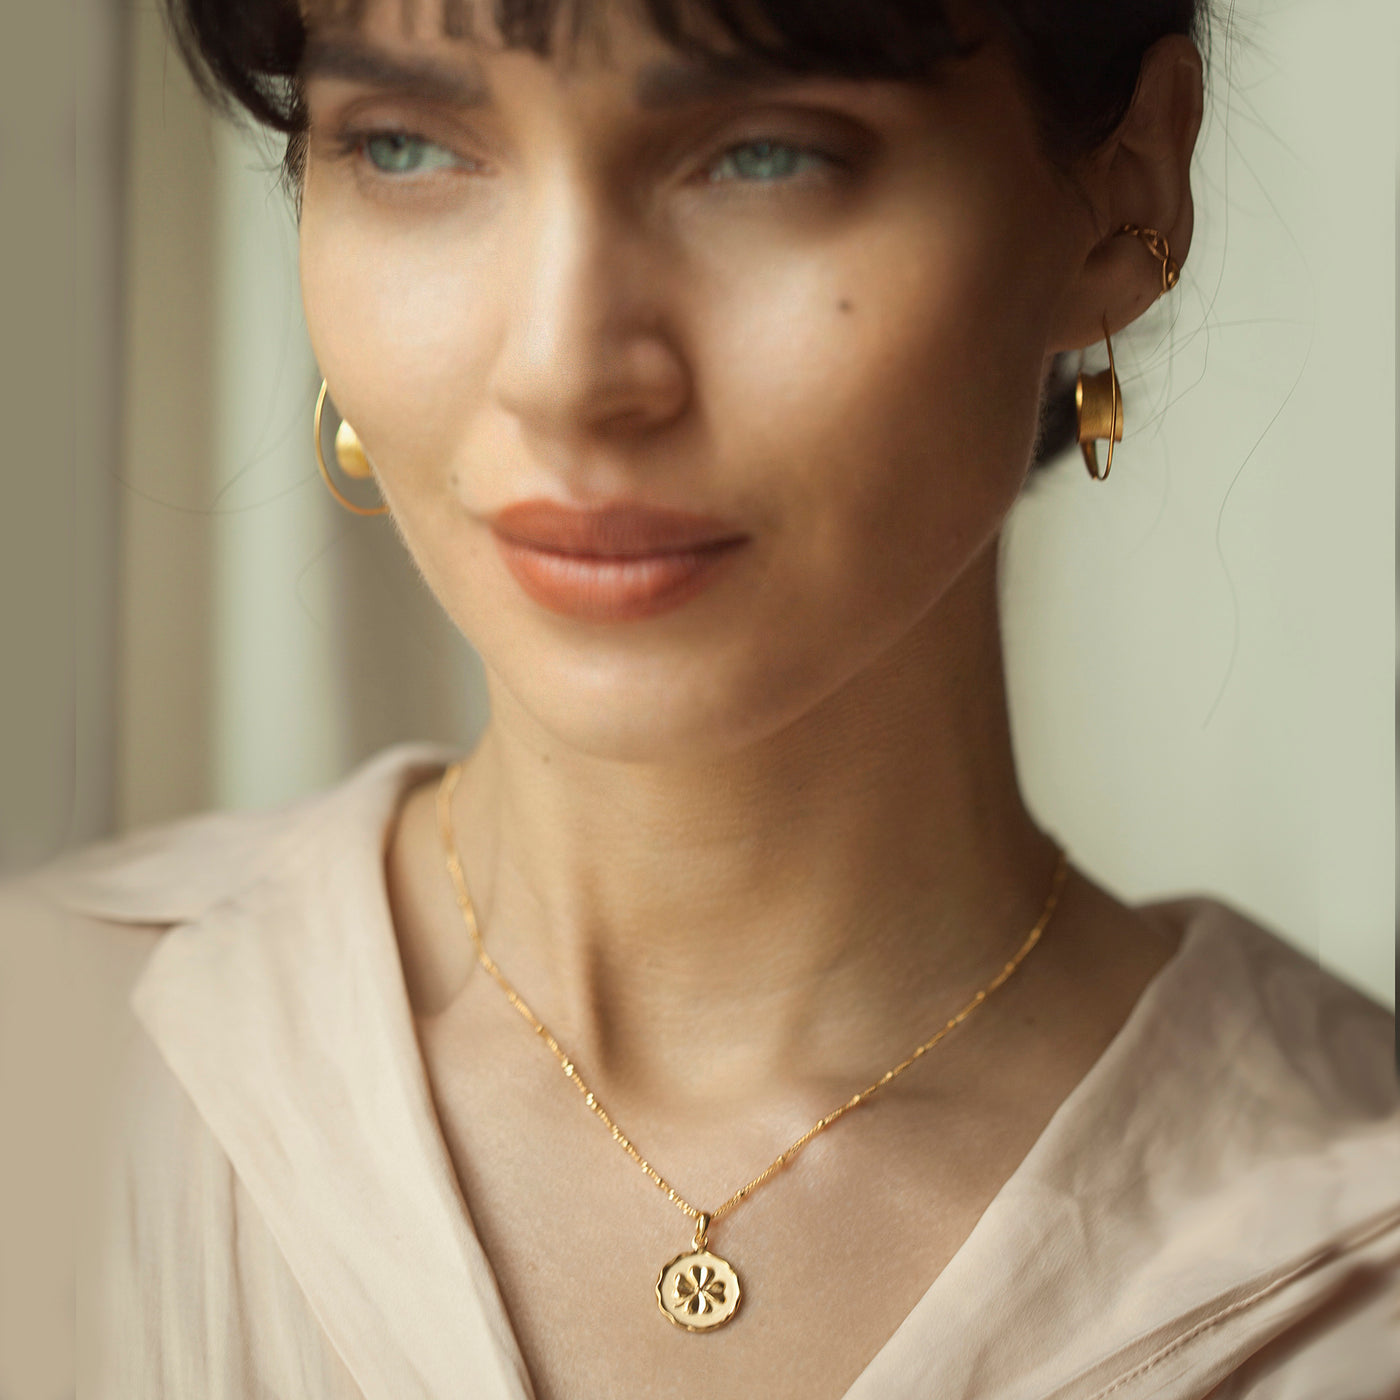 Modell Wearing Gold Four-Leaf Clover Necklace